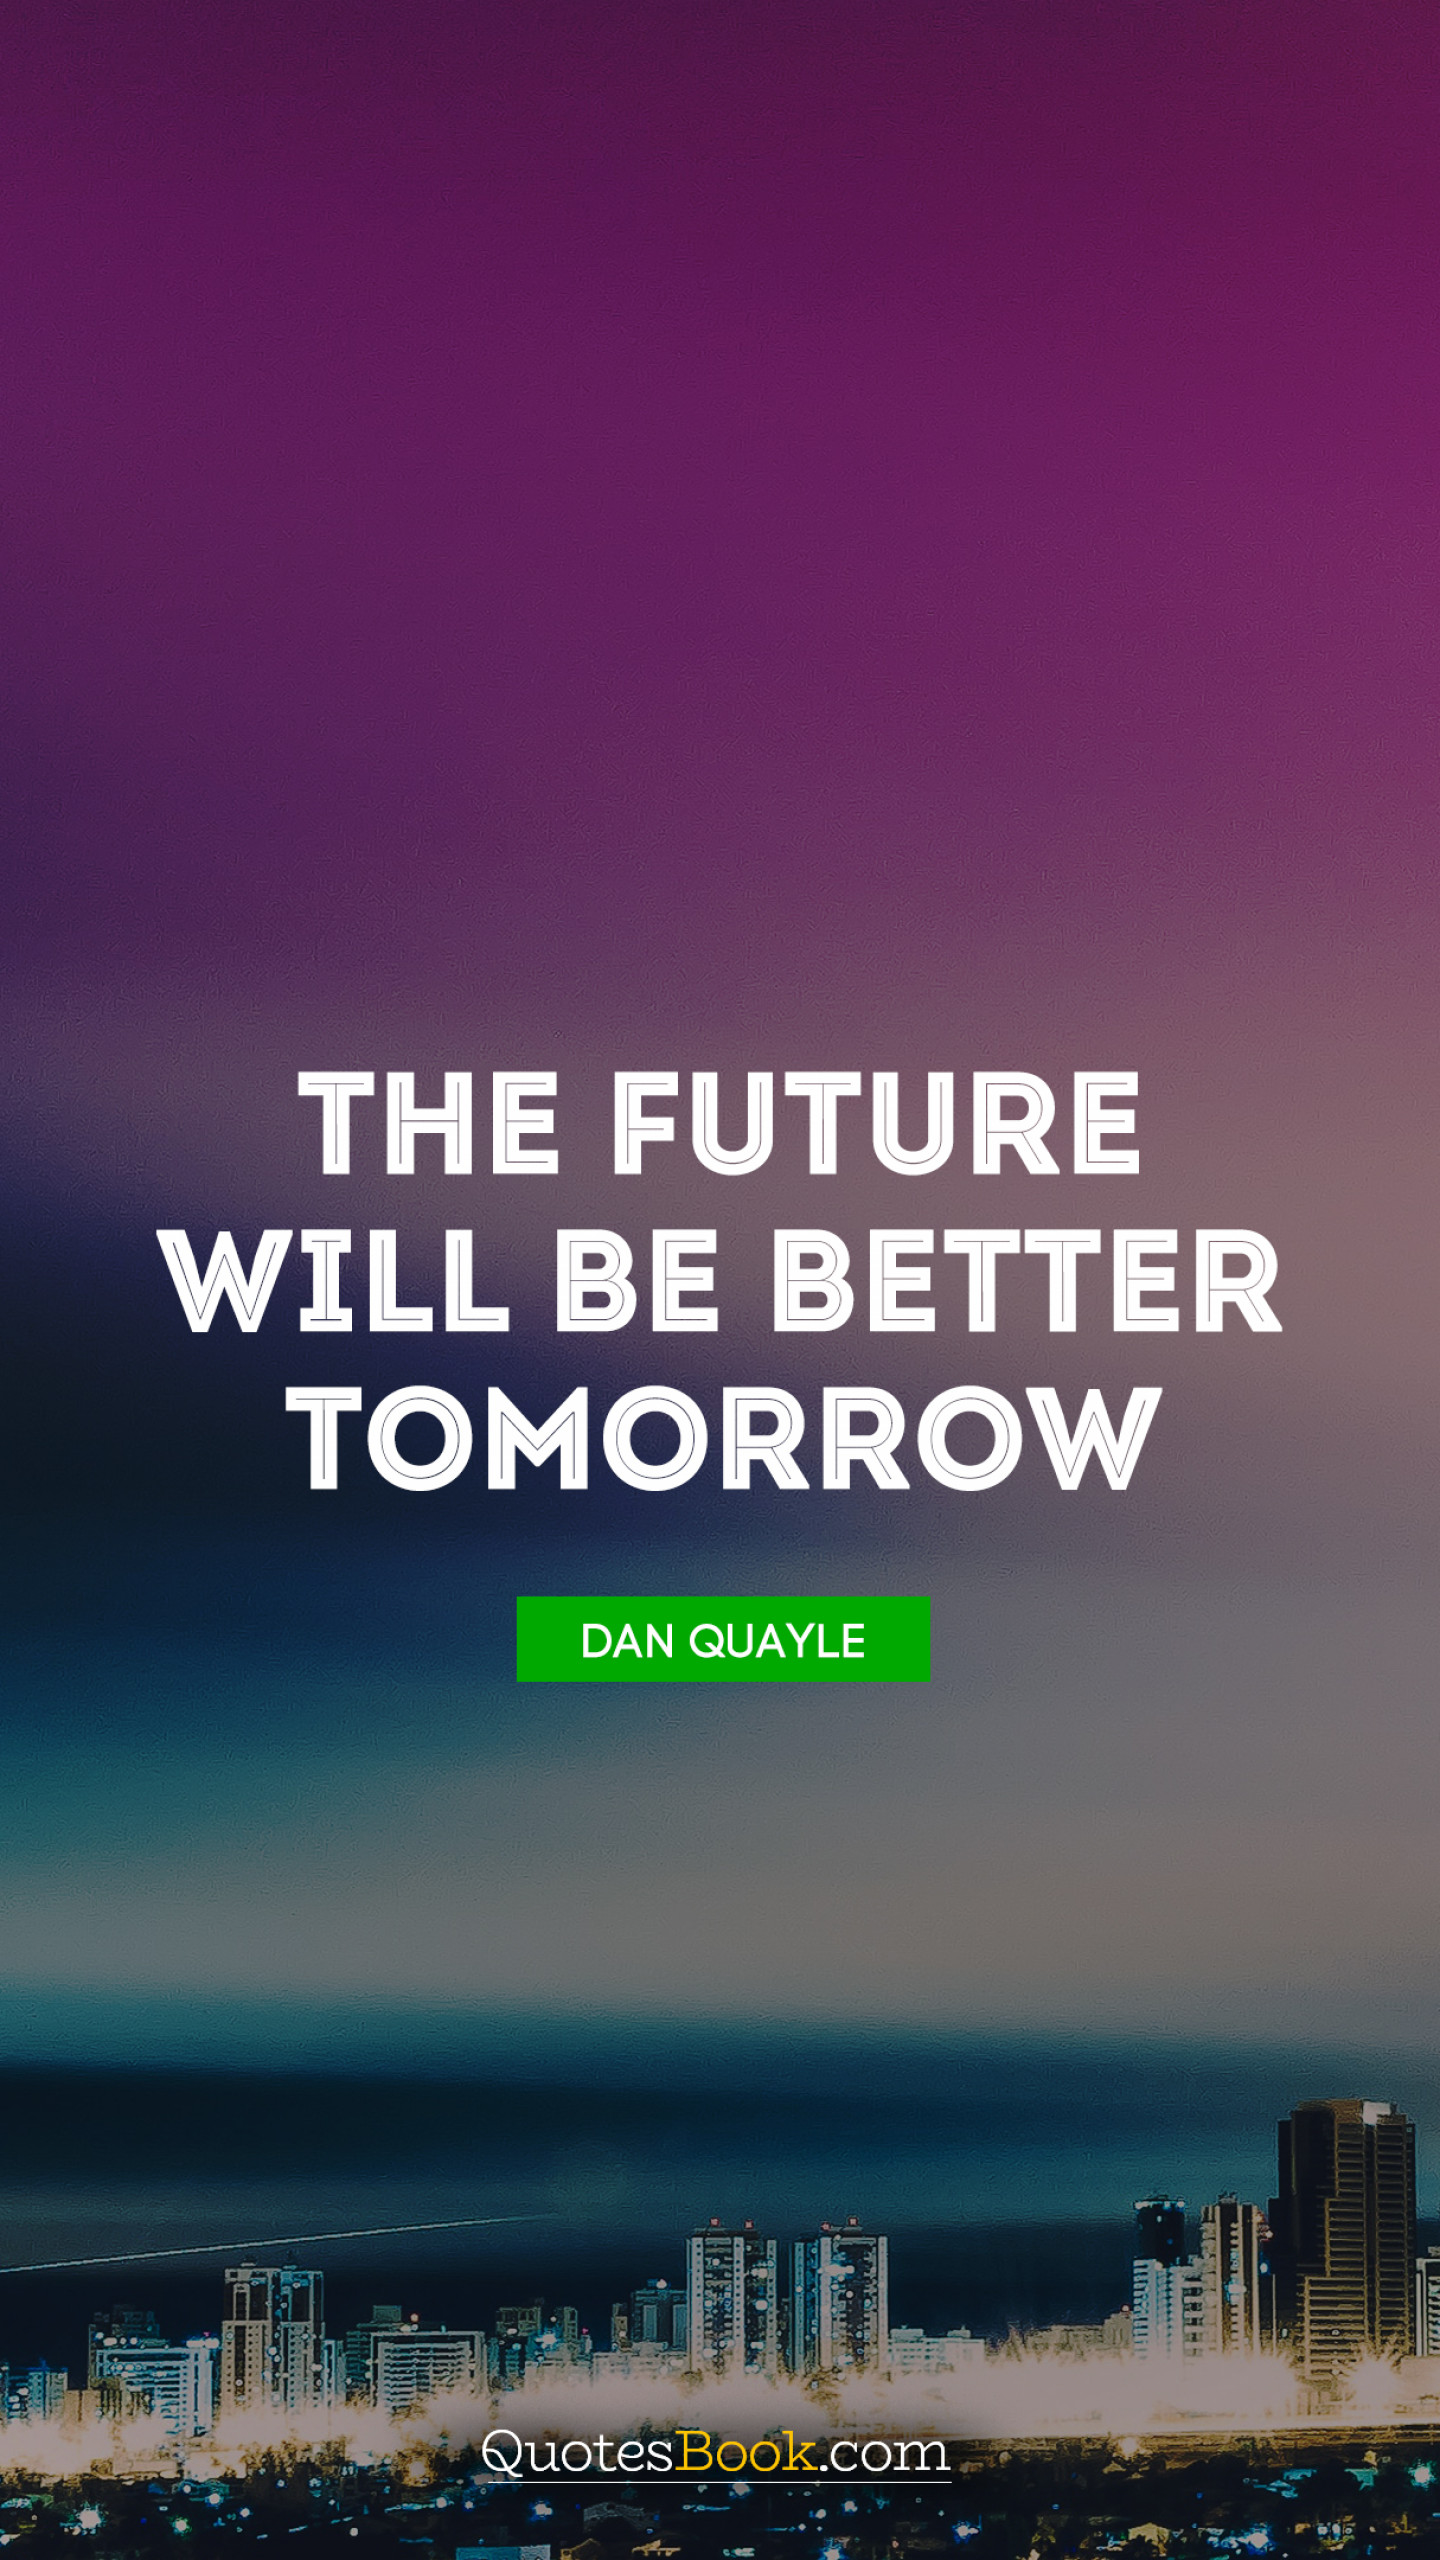 The future will be better tomorrow. - Quote by Dan Quayle - Page 2